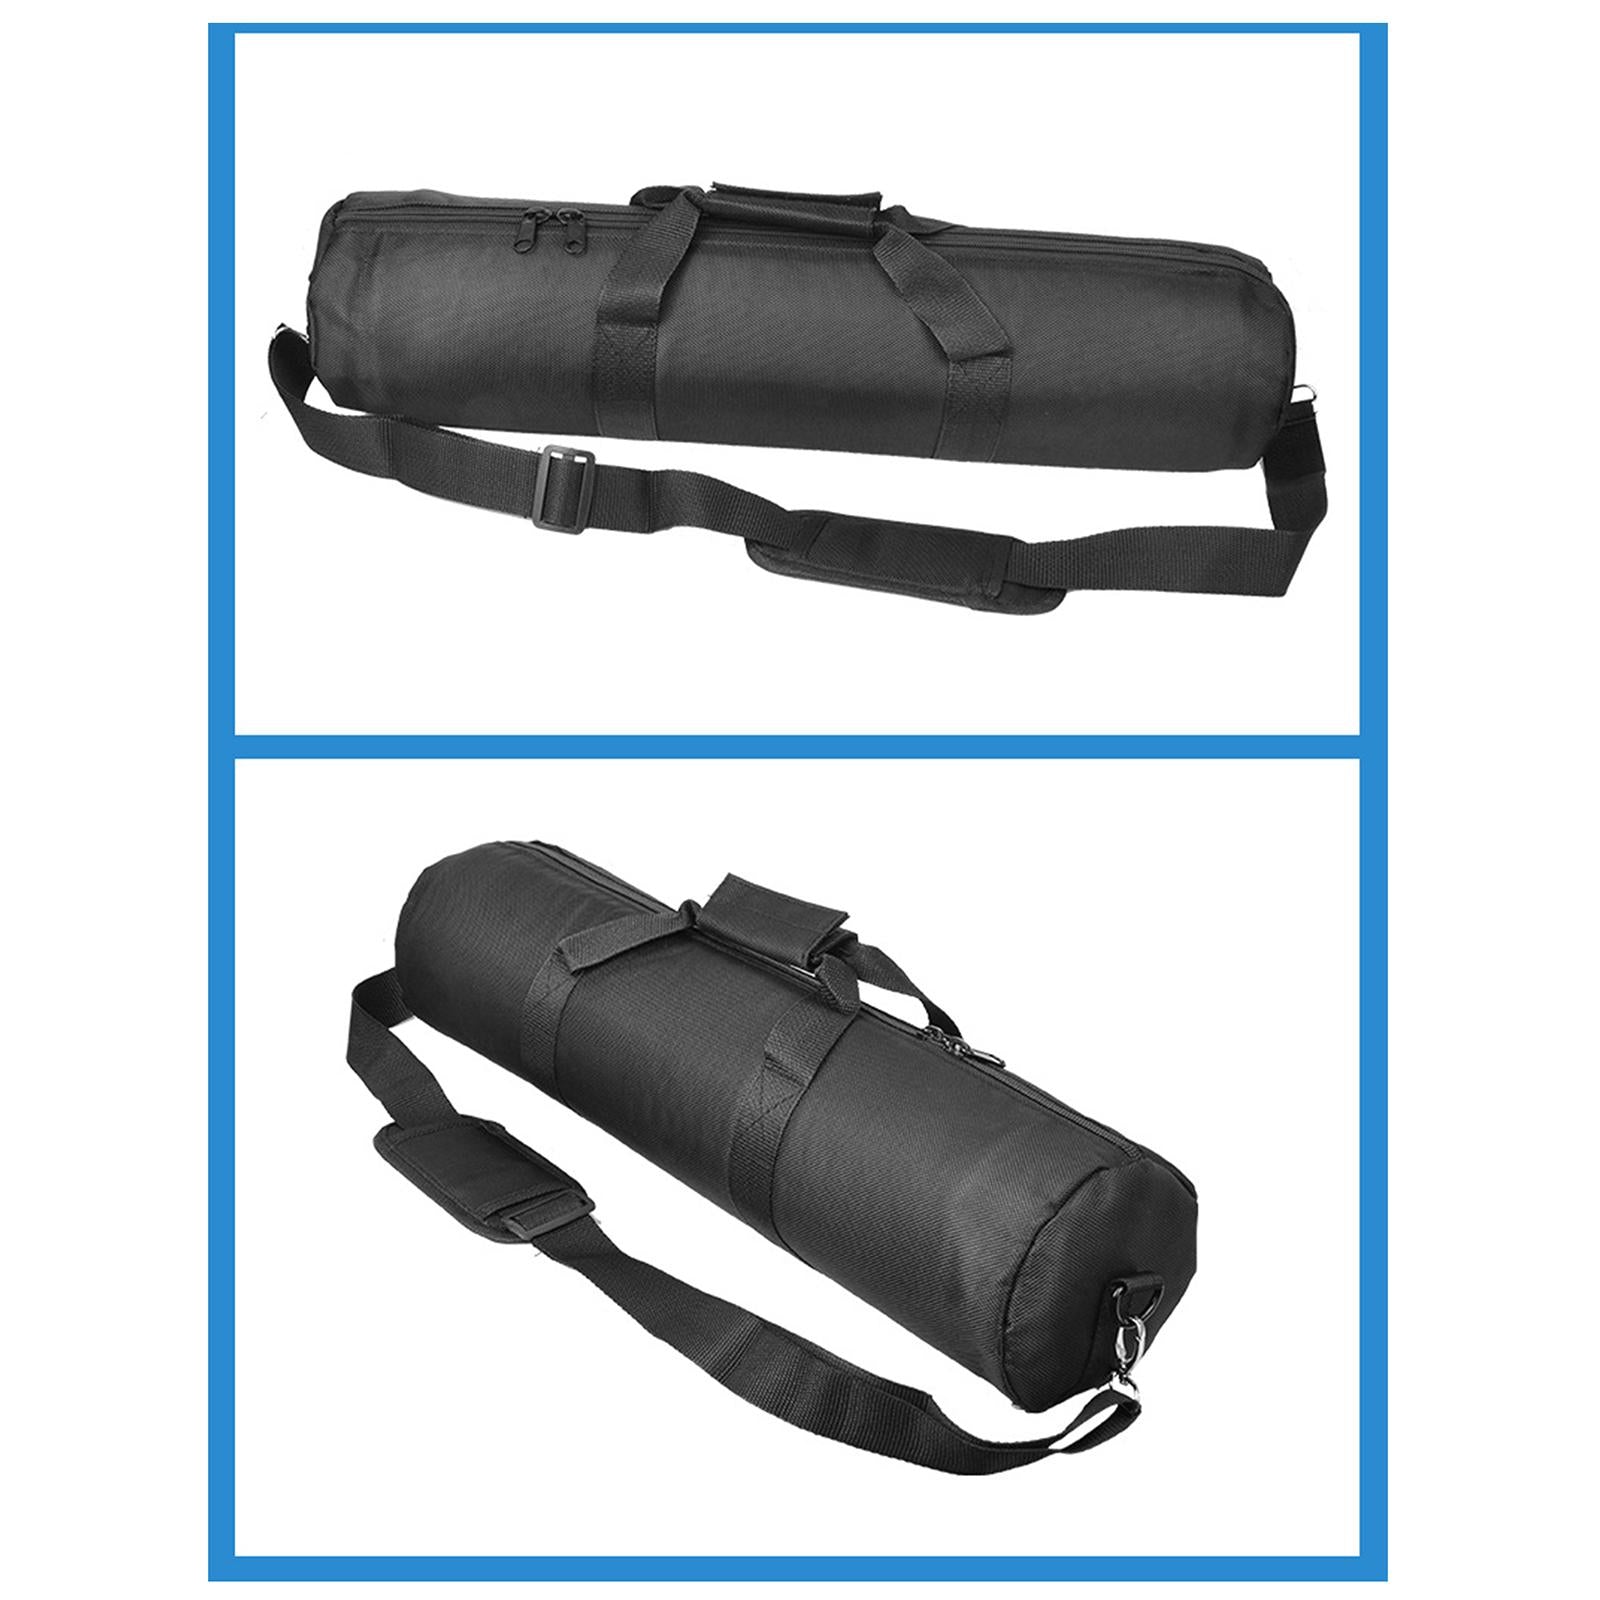 Tripod Carrying Bag Heavy Duty Multi Function Dual Use Outdoor for Umbrella 80cm